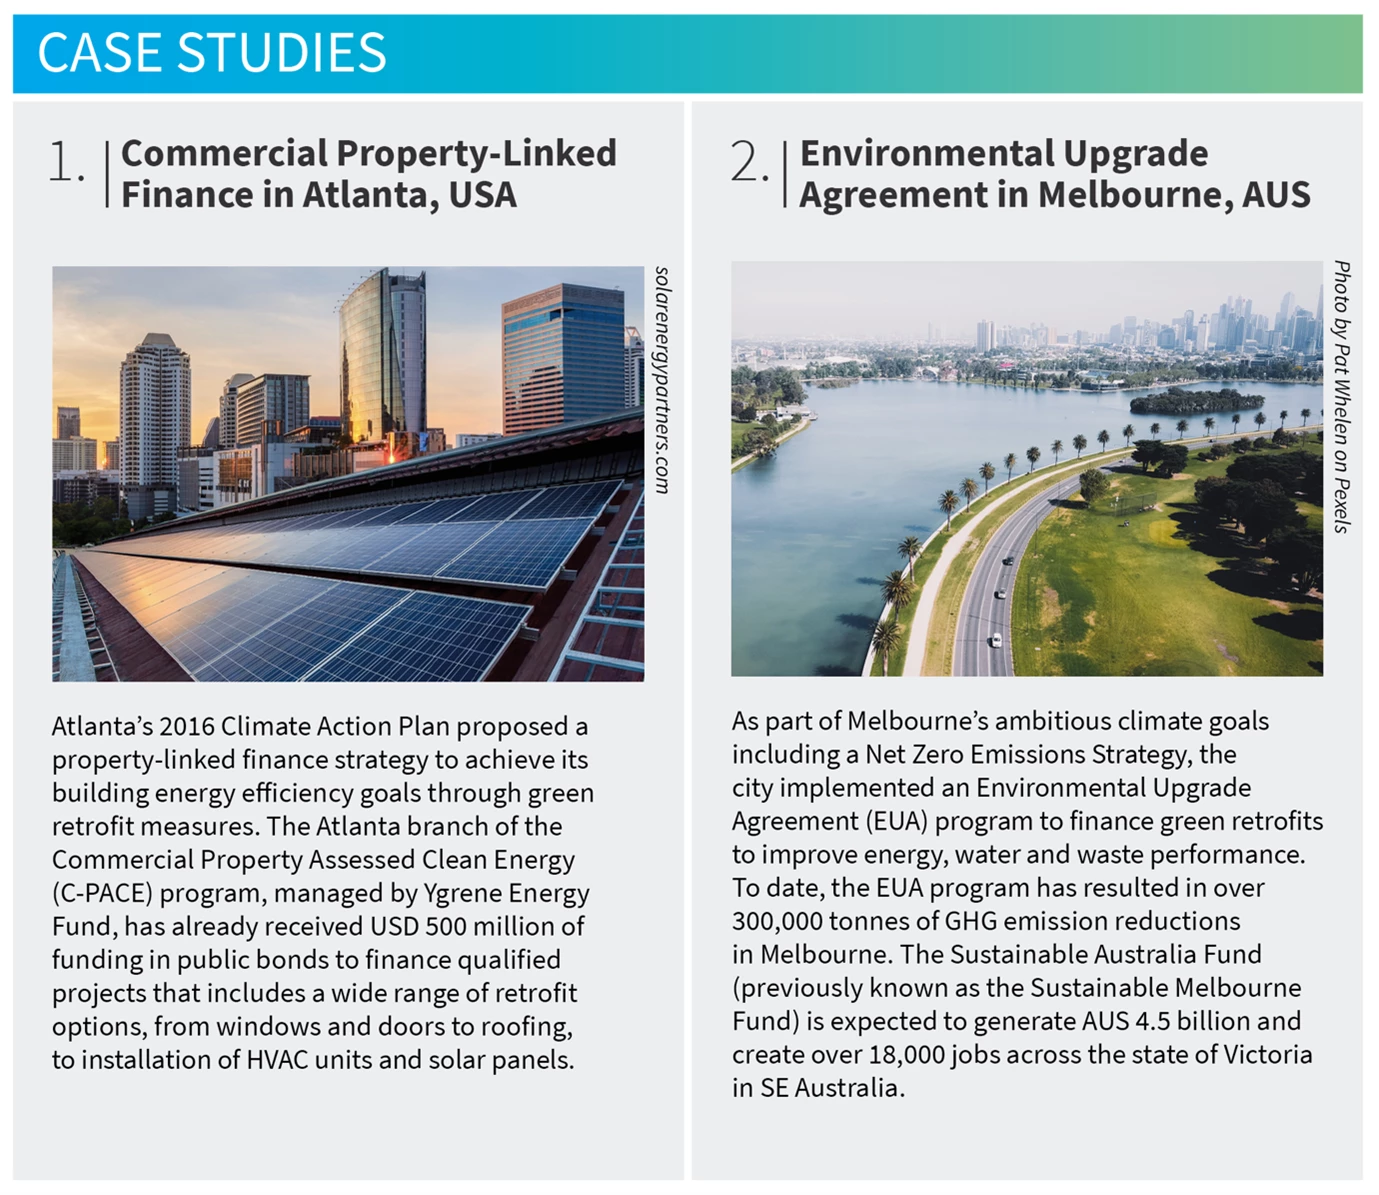 Screenshots of two case studies, one of commercial property-linked finance and the other of environmental upgrade agreement.